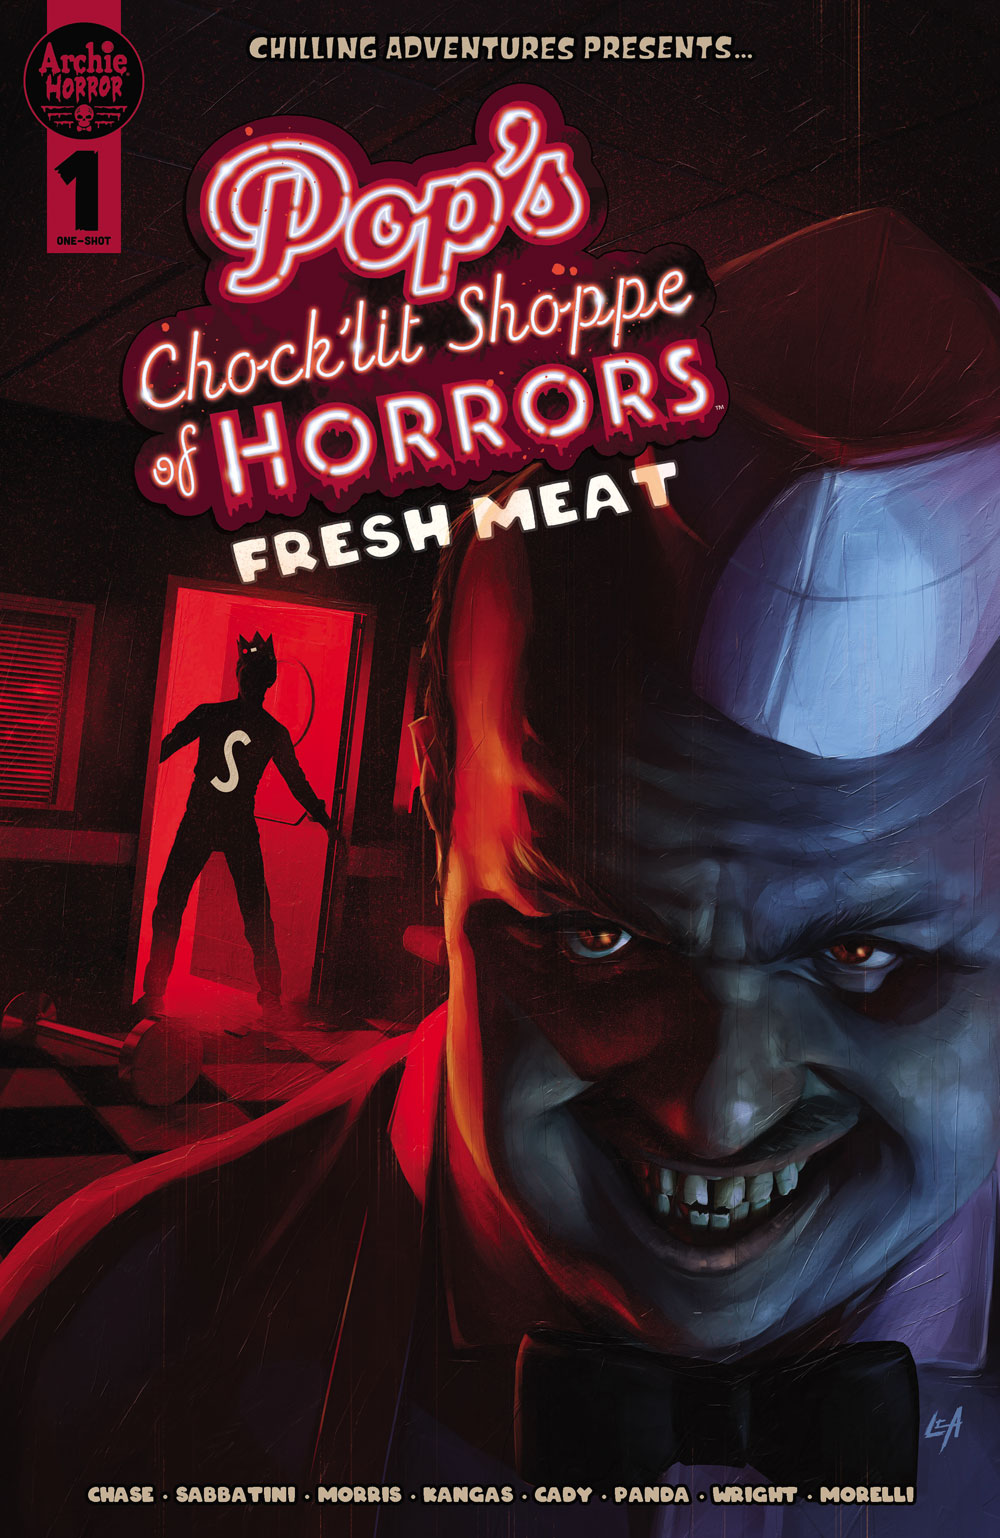 Variant Cover of POP’S CHOCK’LIT SHOPPE OF HORRORS: FRESH MEAT. Pop Tate stands in the foreground with an evil grin while Jughead enters the darkened diner in the background.